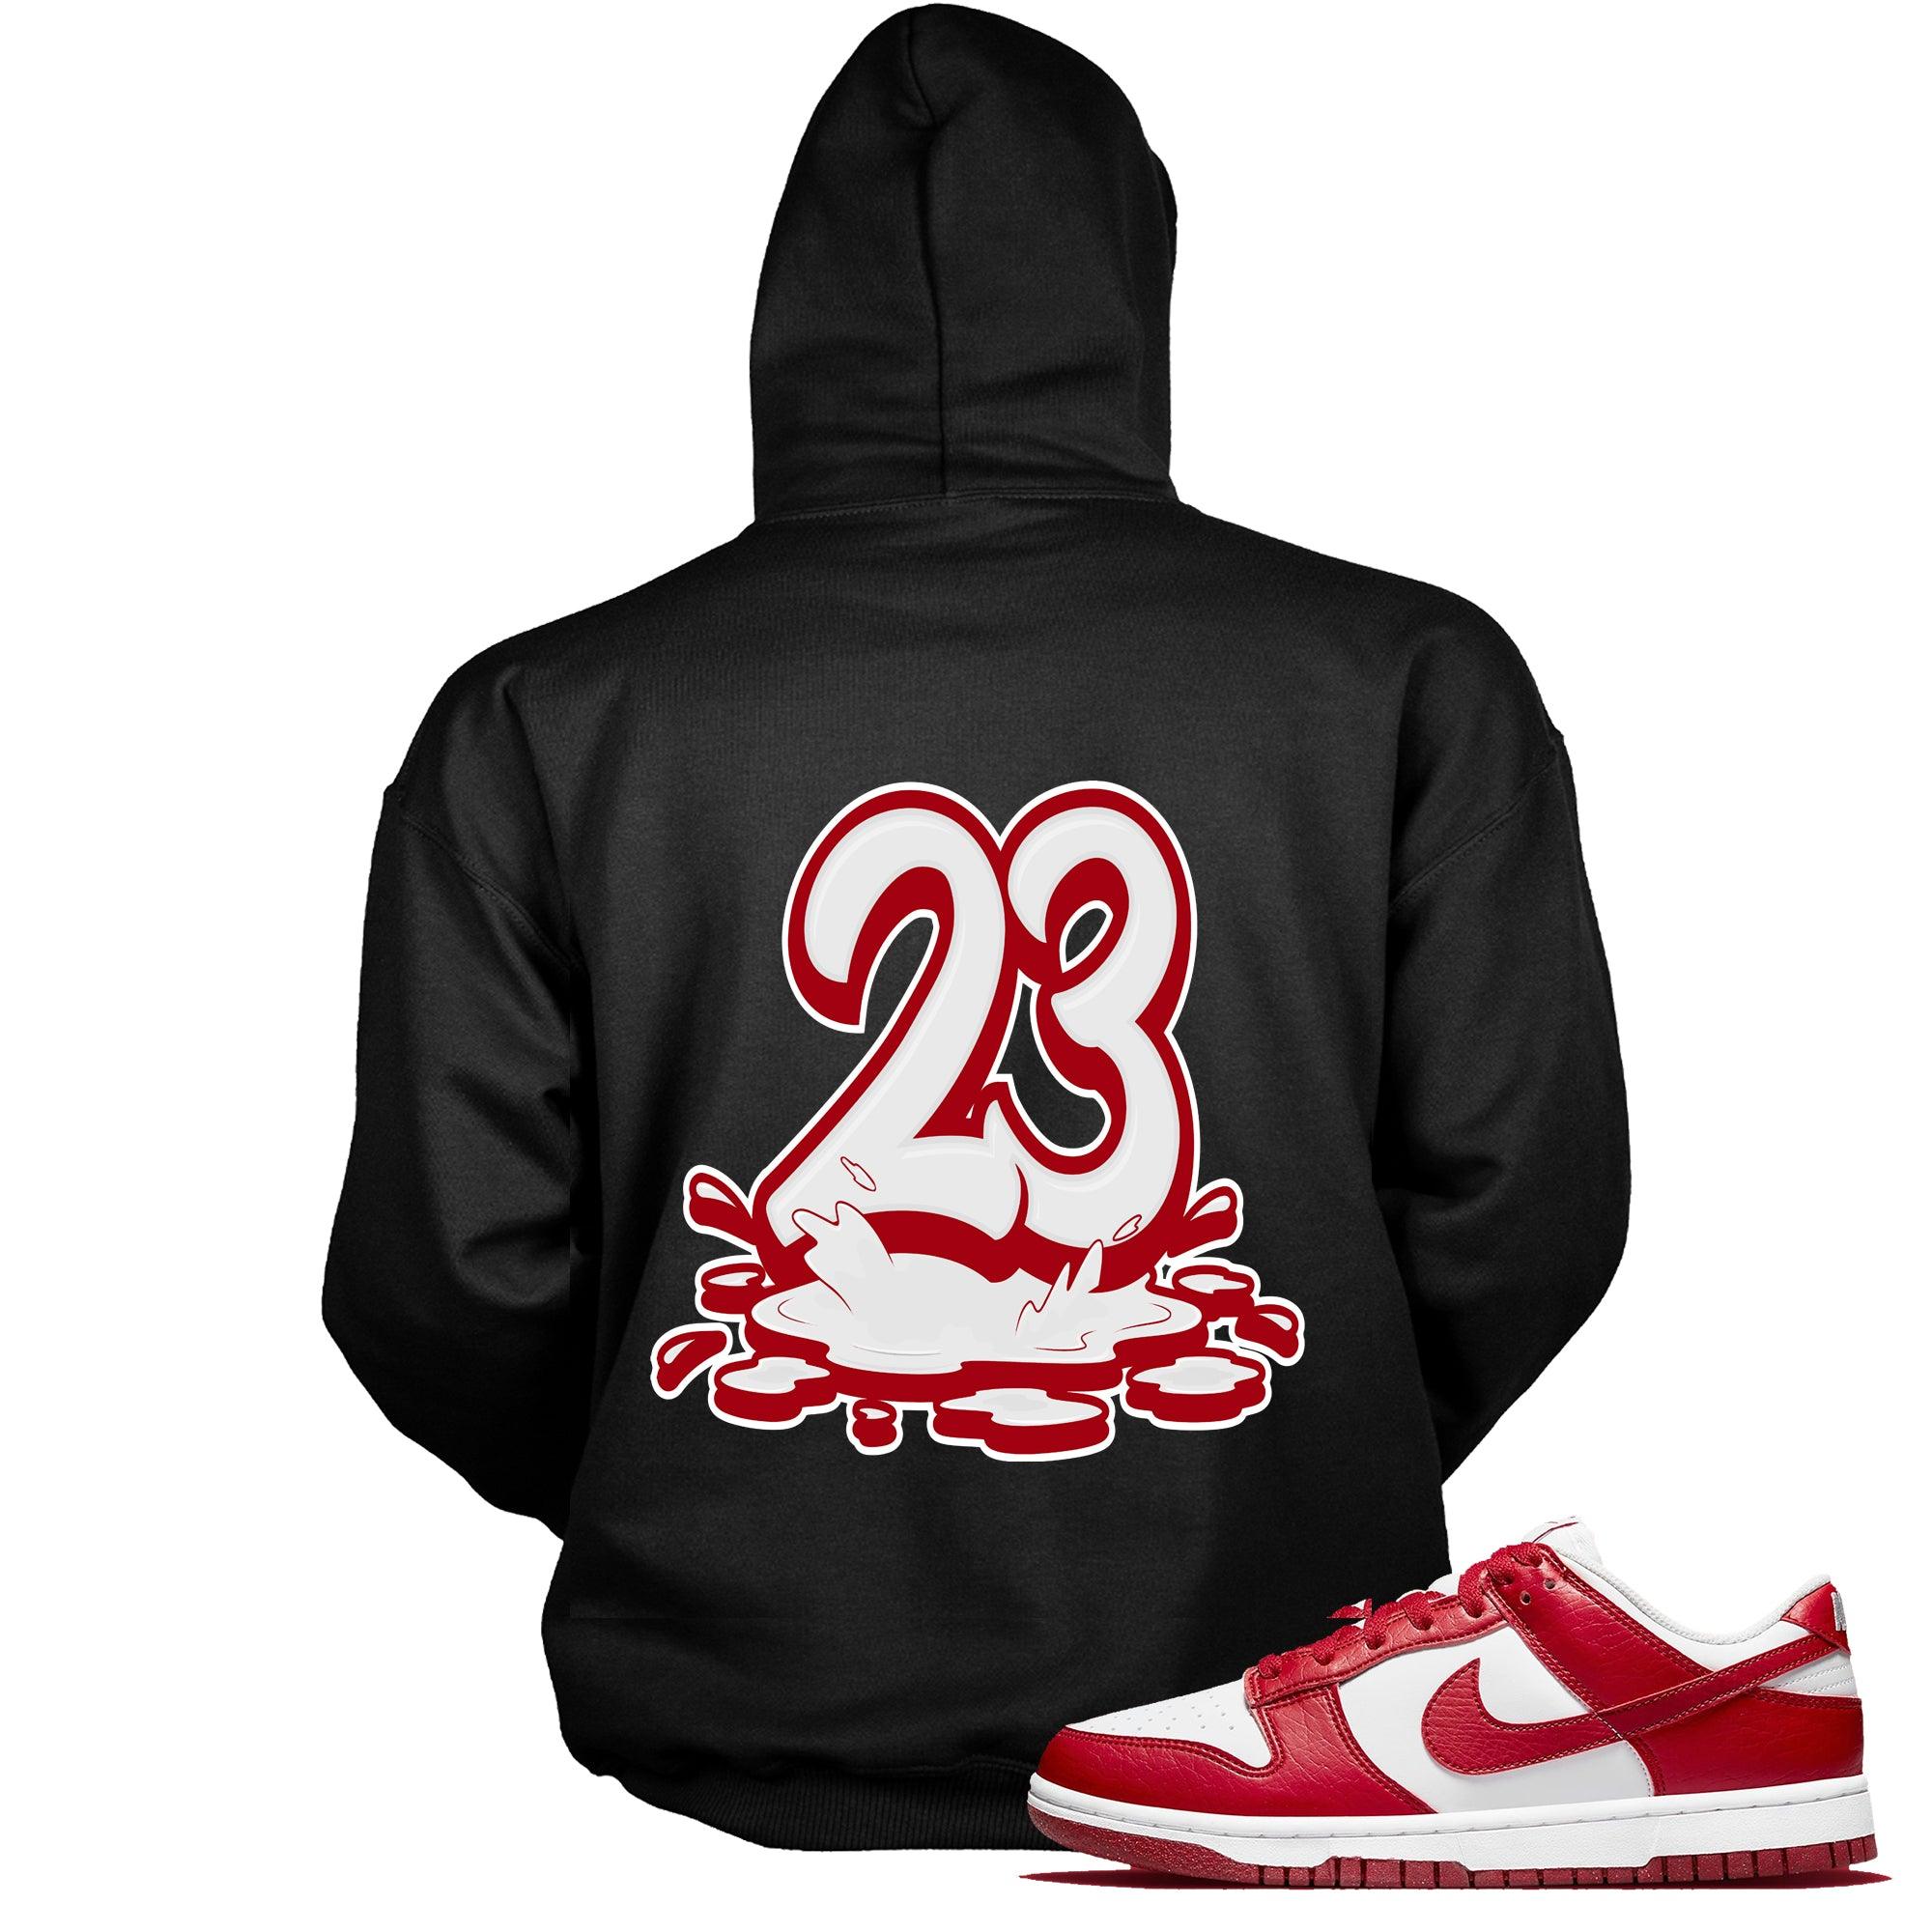 23 Melting Hoodie Dunk Low Next Nature White Gym Red Sneakers photo